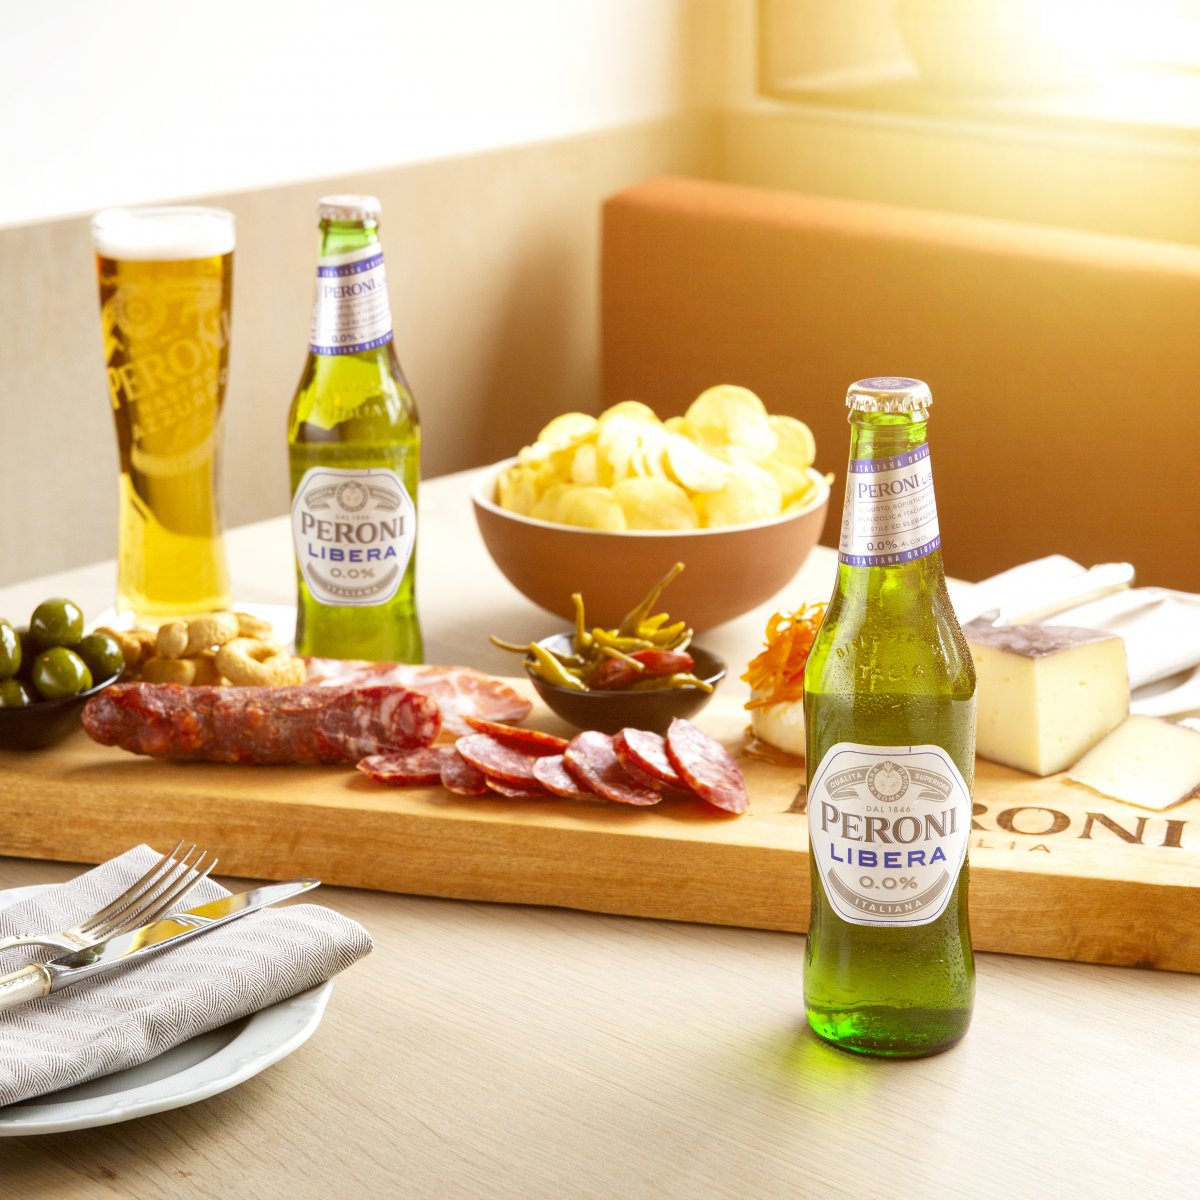 Board of assorted meats and cheeses accompanied by Peroni Libera a new non-alcoholic beer.